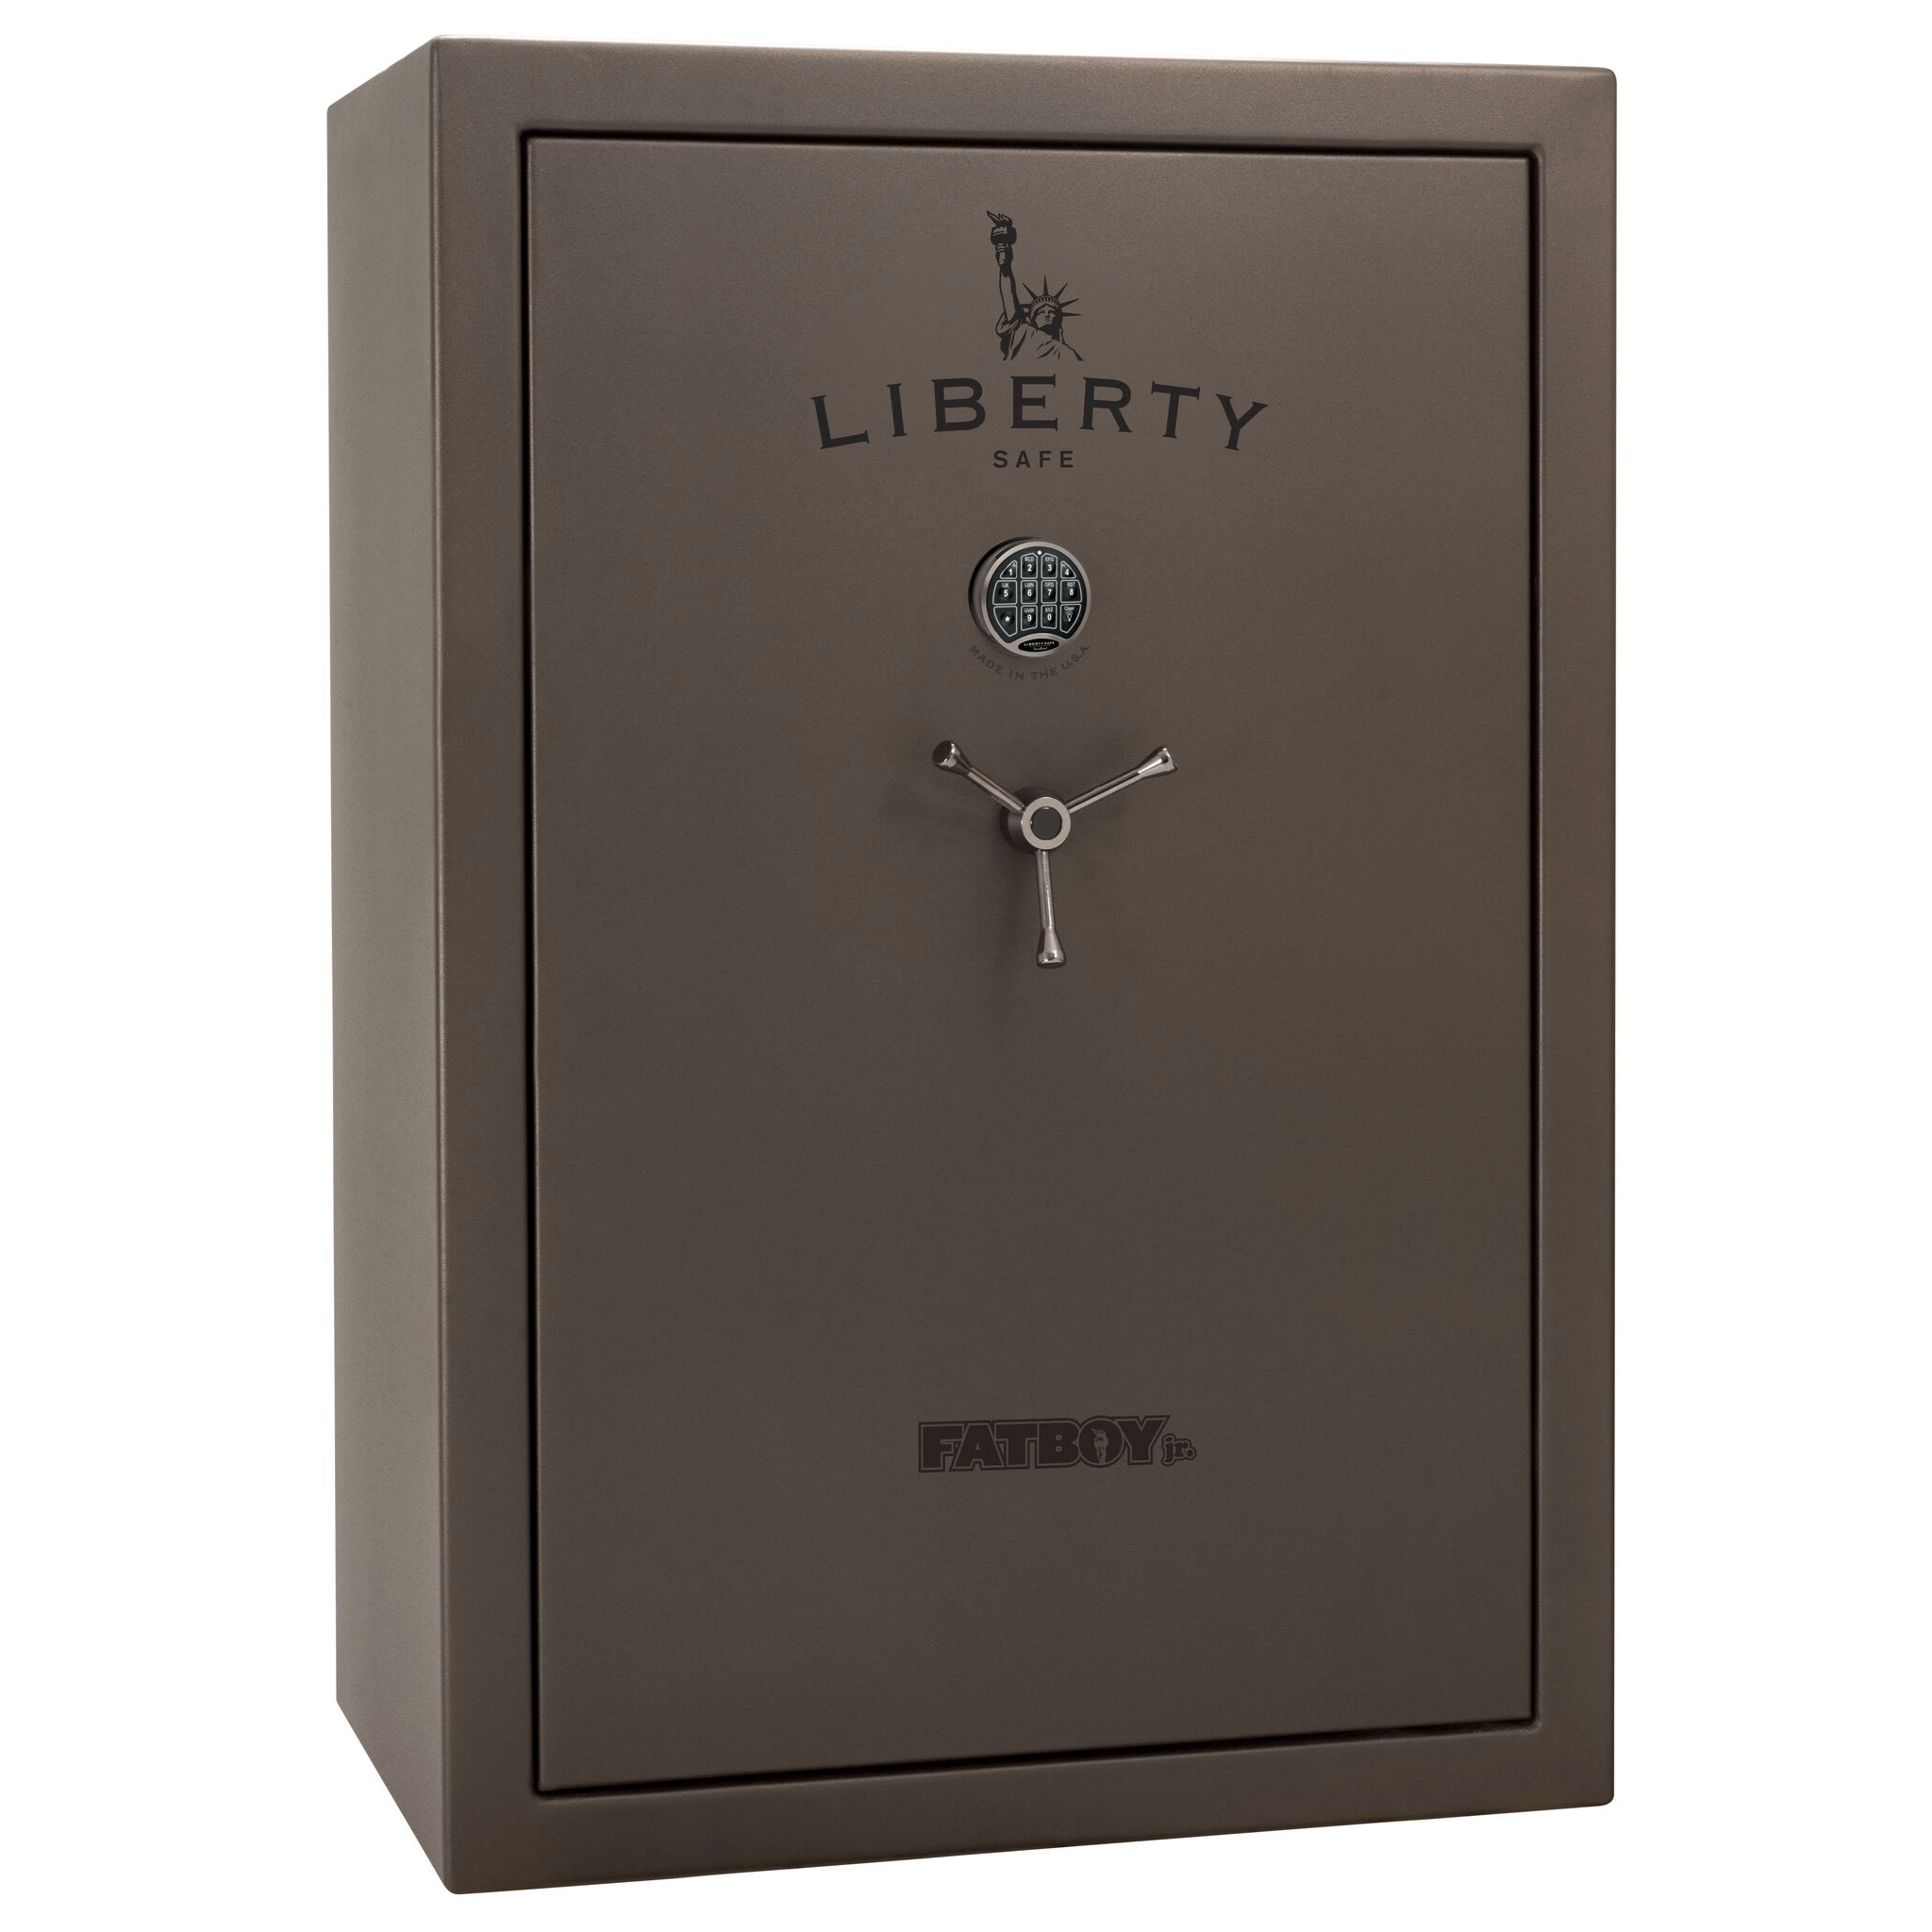 Fatboy Jr. Series | Level 3 Security | 75 Minute Fire Protection | 48XT | Dimensions: 60.5"(H) x 42"(W) x 25"(D) | Extreme 6 in 1 Flex Interior | Black Textured | Electronic Lock